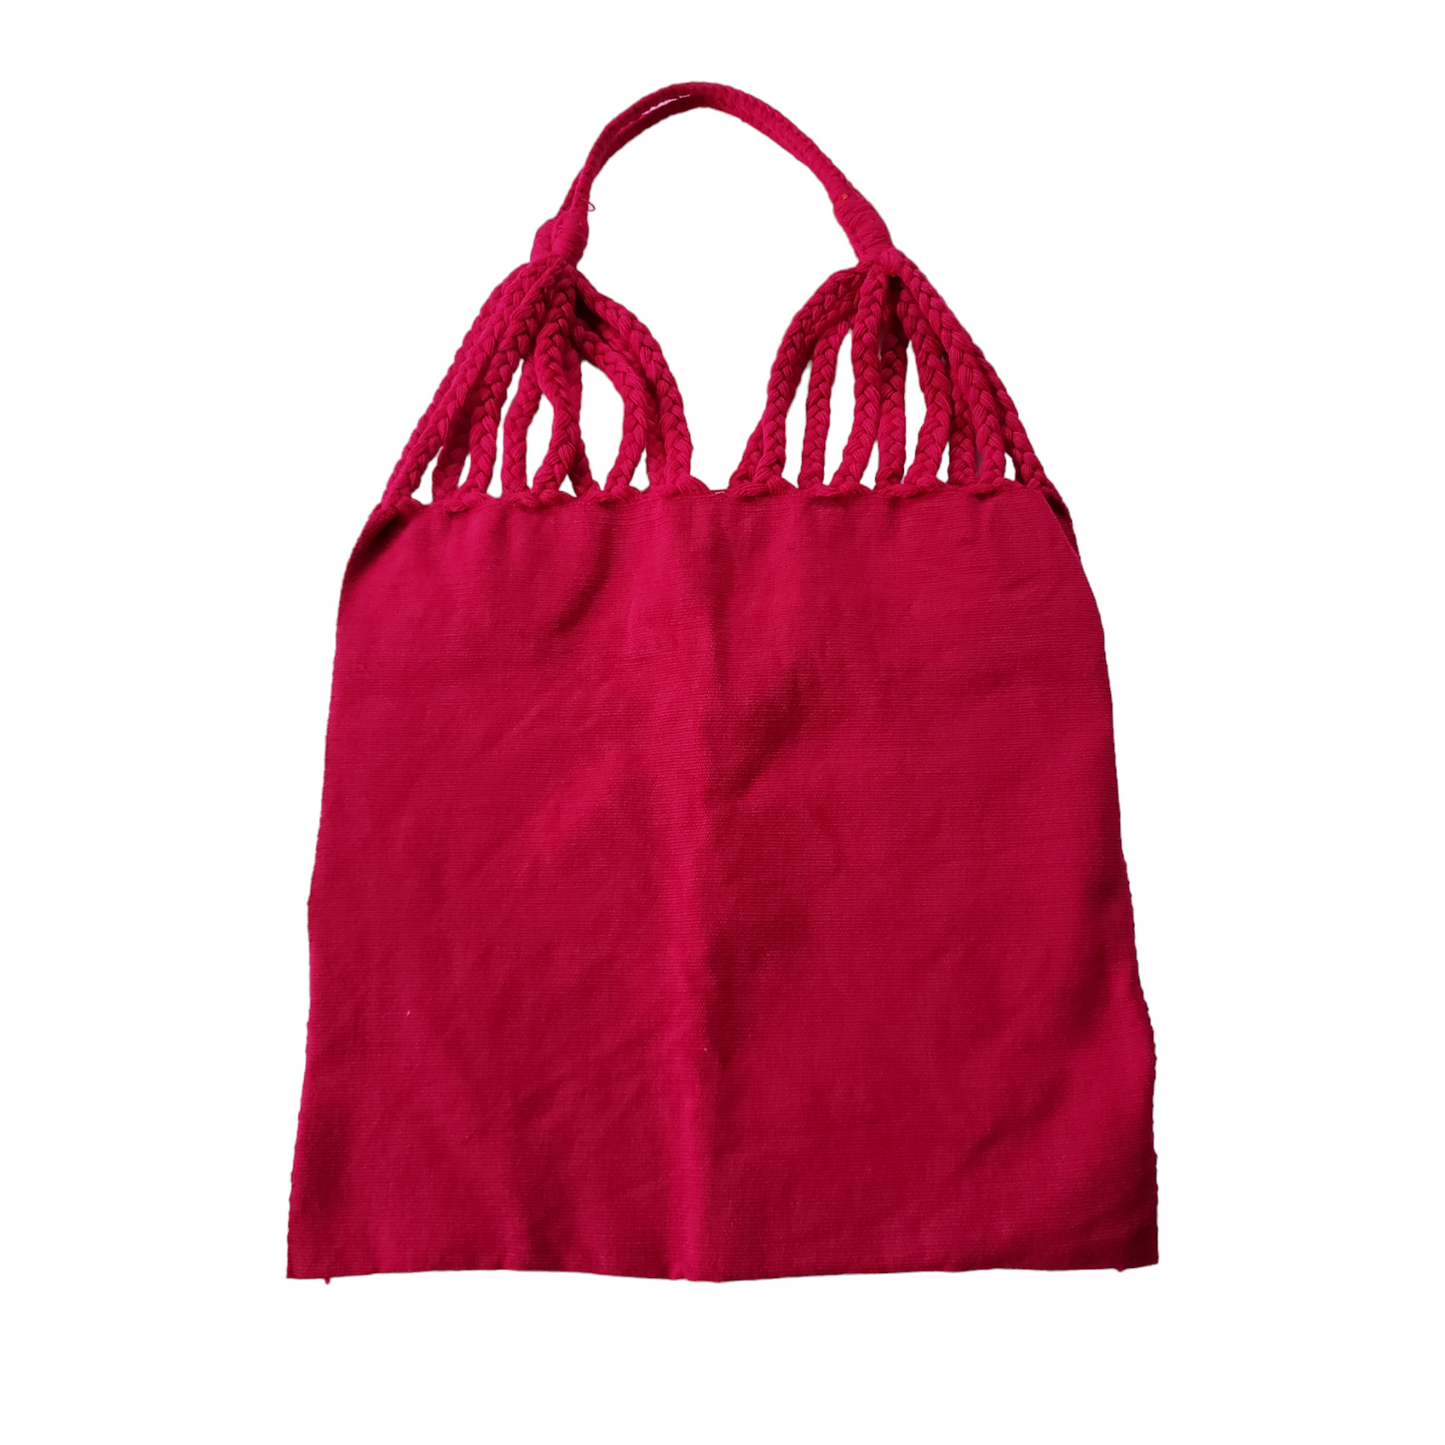 Embroidered Mexican Woven Tote Bag